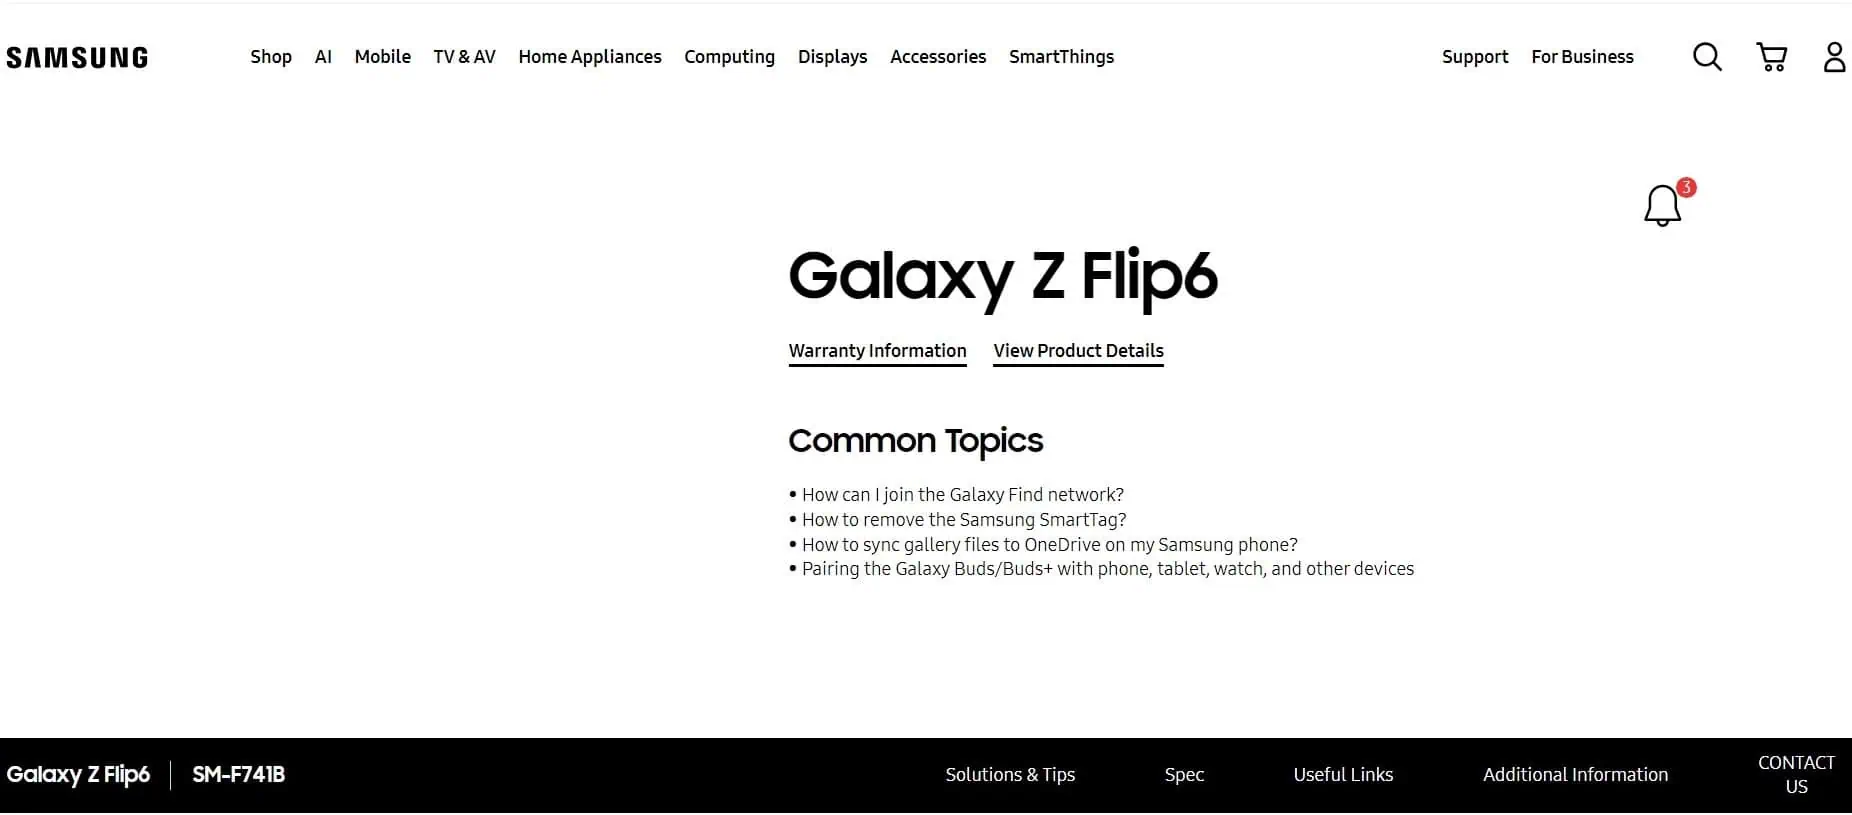 Samsung Galaxy Z Flip 6 official support page